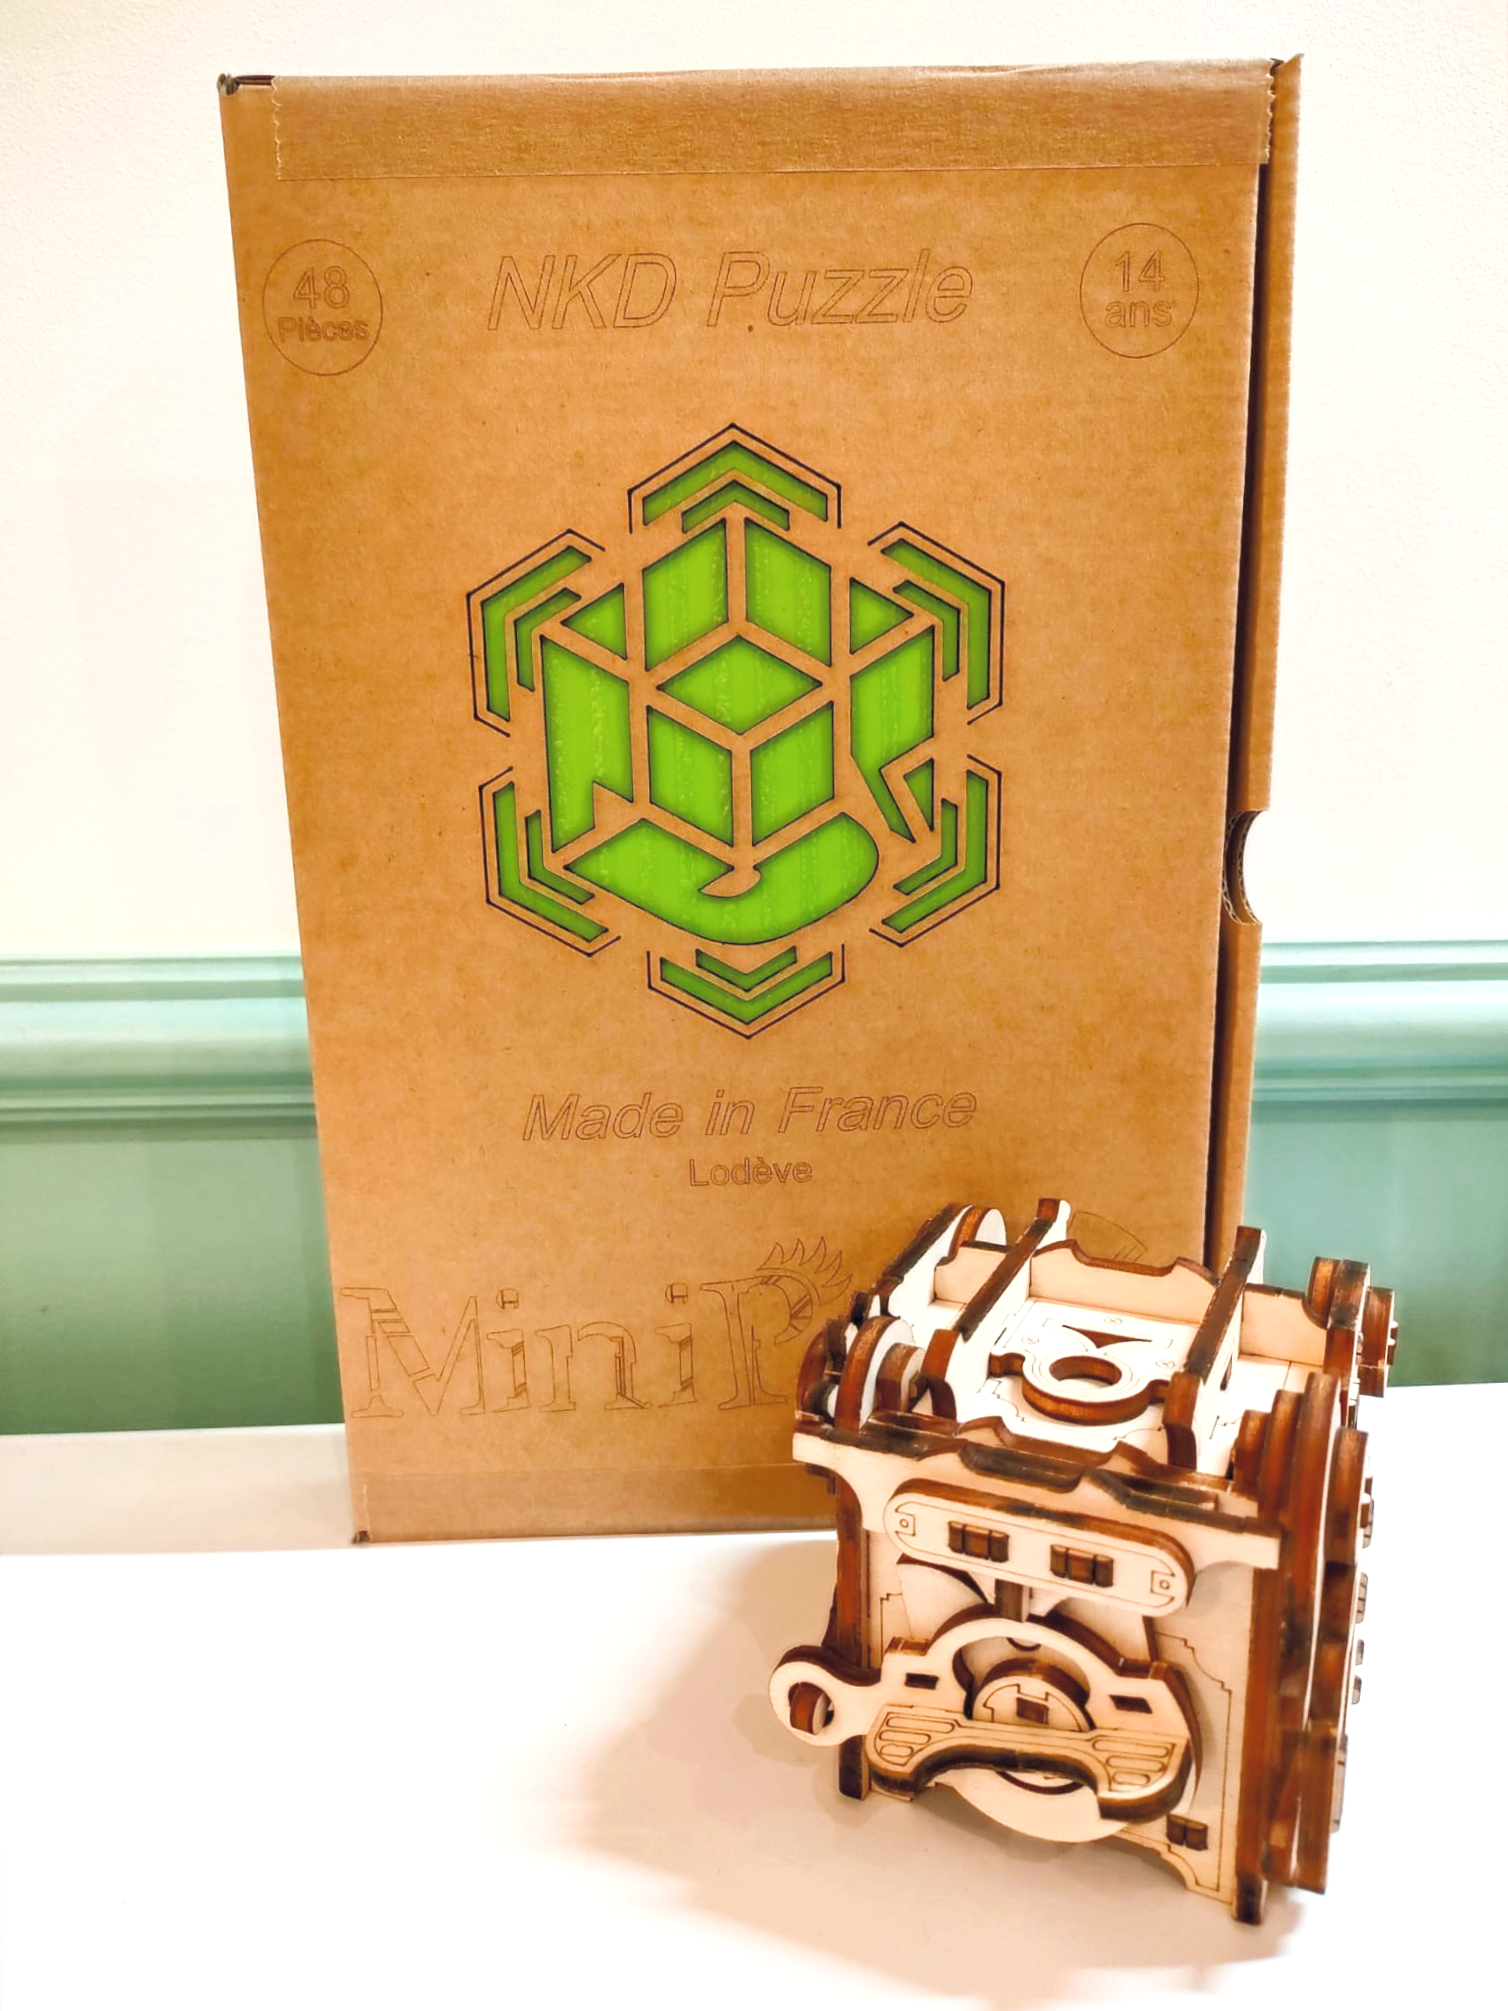 Minipunk Puzzle box kit - Made in France - NKD Puzzle